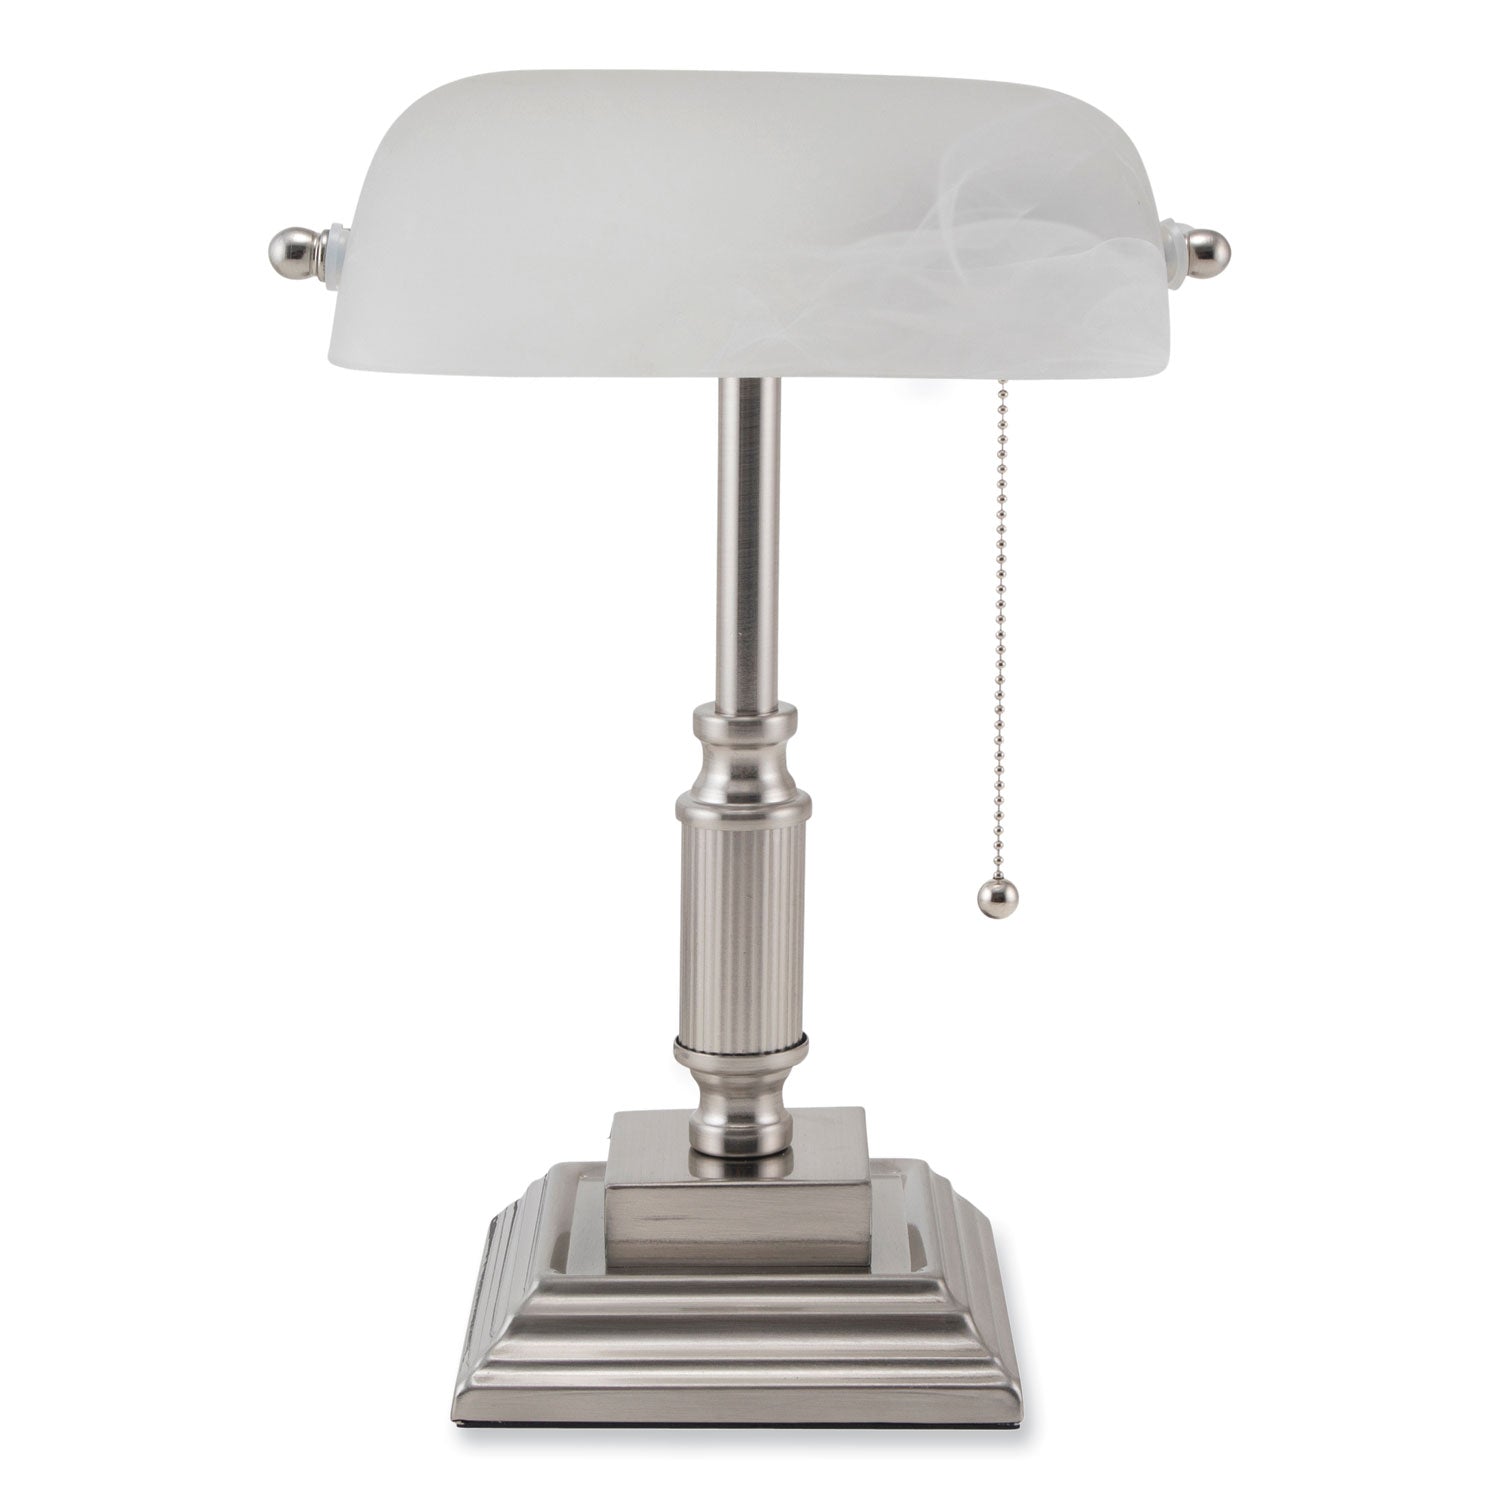 led-bankers-lamp-with-frosted-shade-1475-high-brushed-nickel-ships-in-4-6-business-days_vlu8vs688029bn - 3